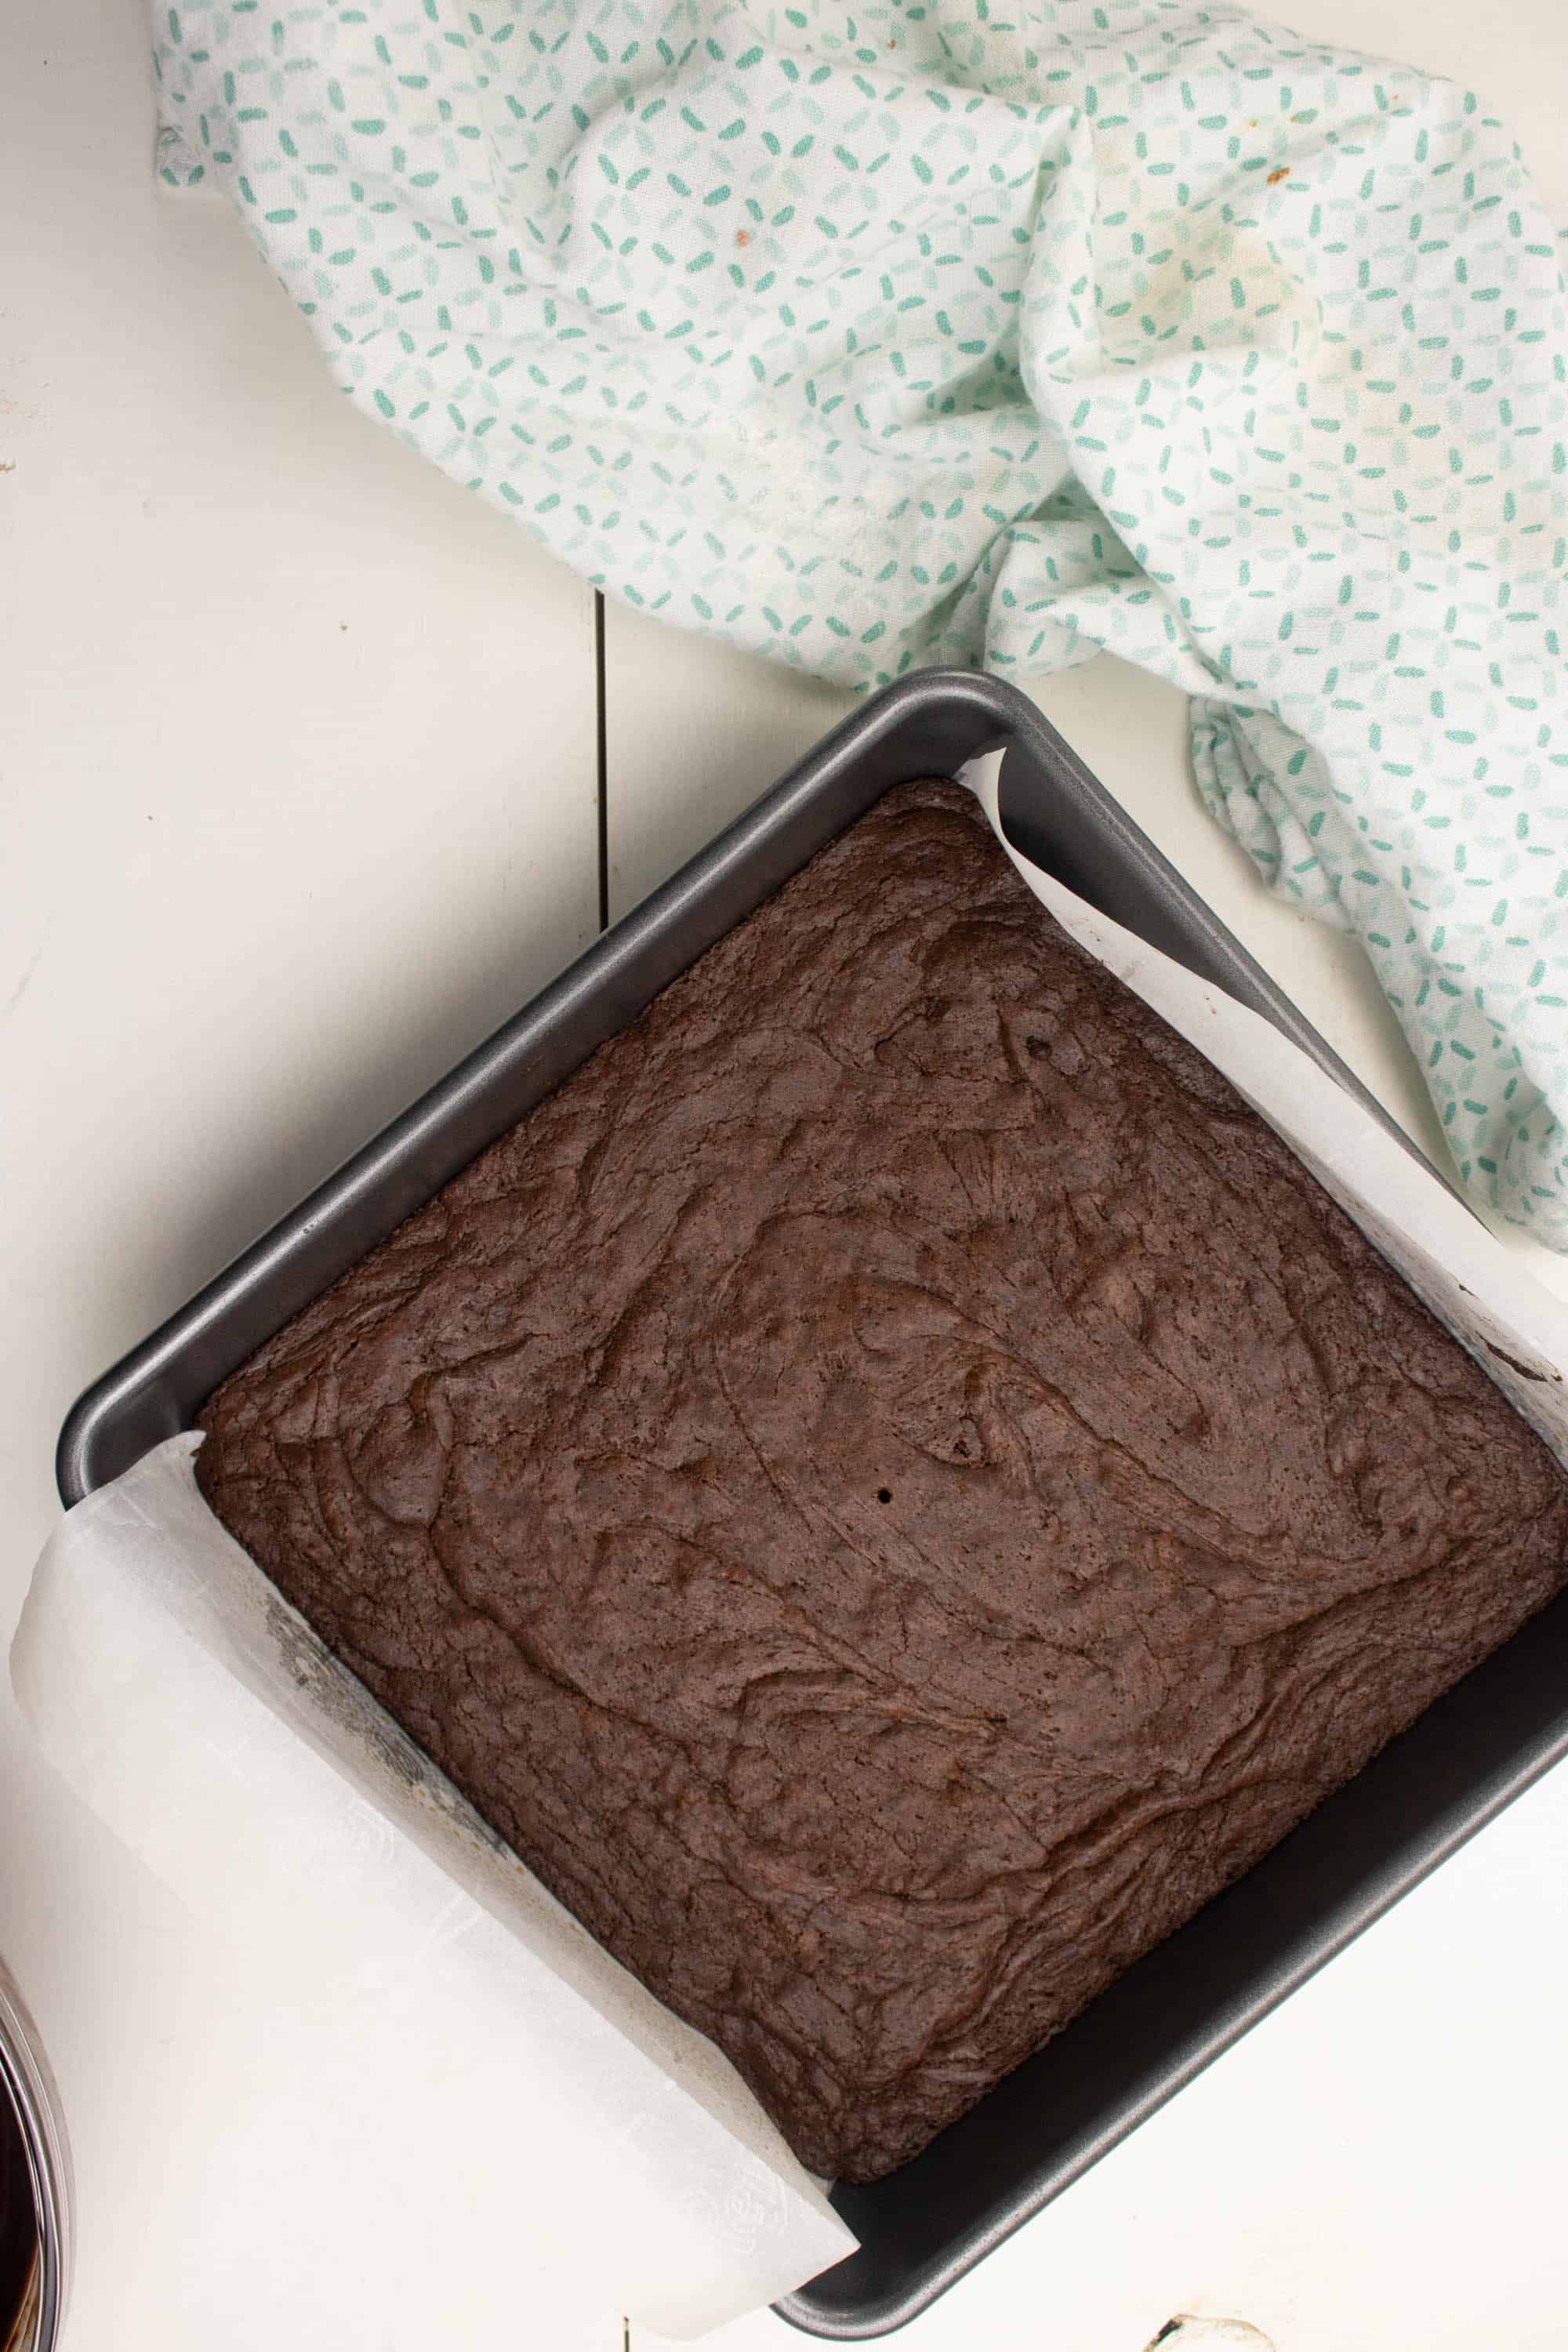 Silver baking pan lined with parchment paper with baked Dark chocolate brownies in it.